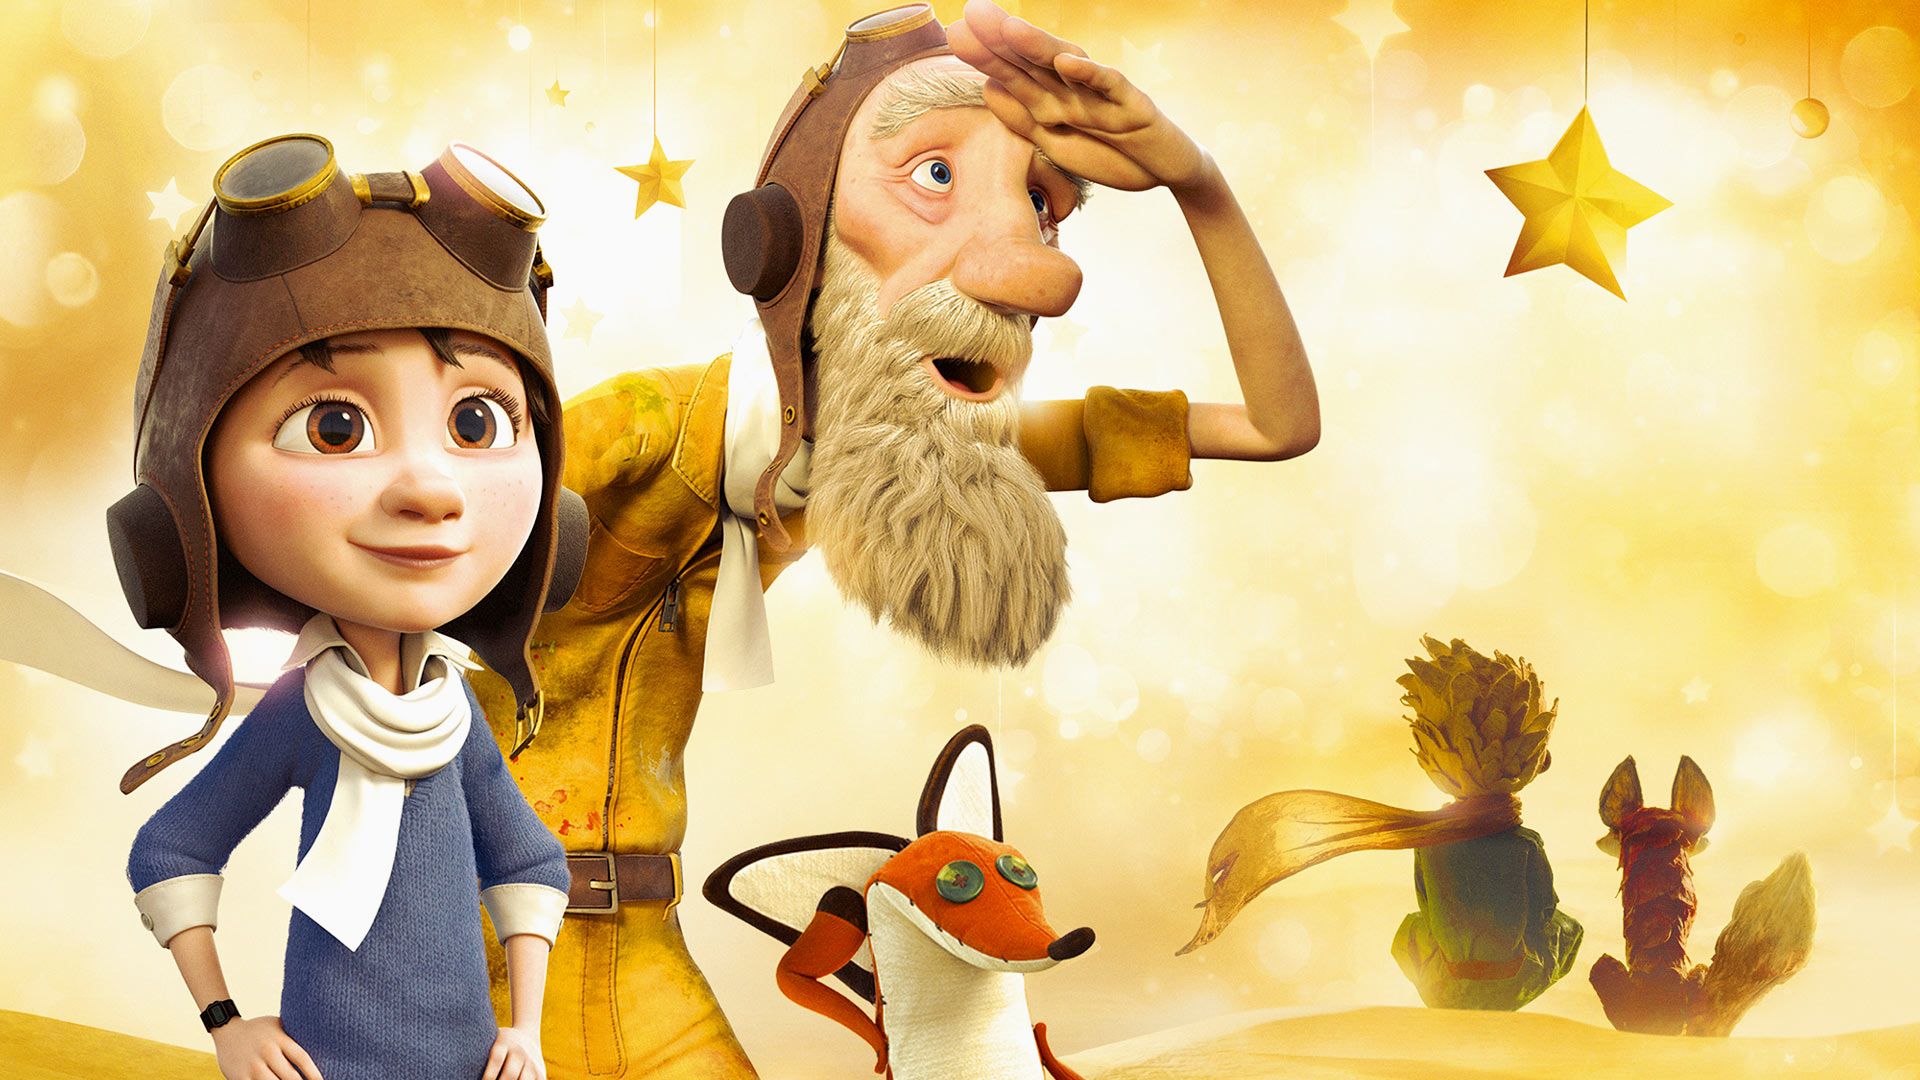 The Little Prince 2015 Movie wallpaper Free full hd wallpapers